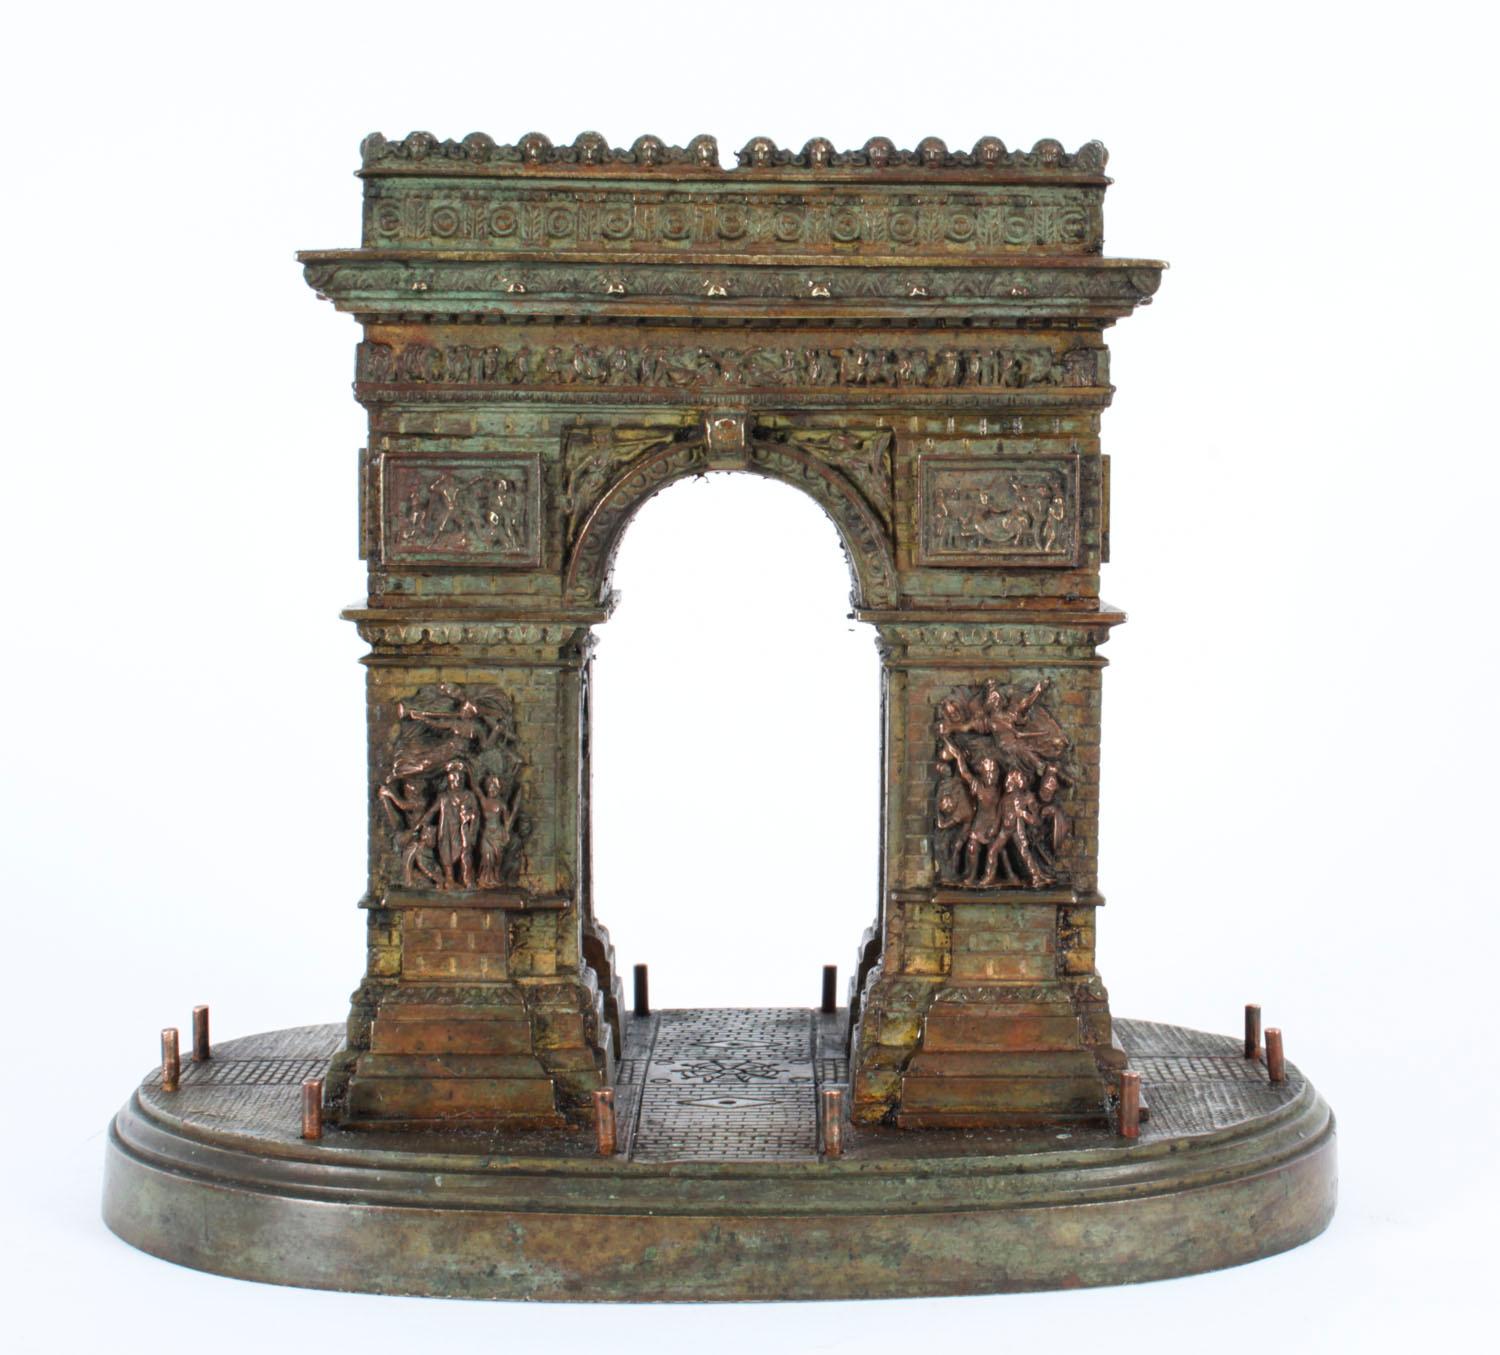 A fine good size French Grand Tour bronze model of the Arc De Triomphe circa 1870 in date.

The beautifully realistic model features the various dramatic high relief panels with a lovely dark brown patina on a oval plinth base.

The monument